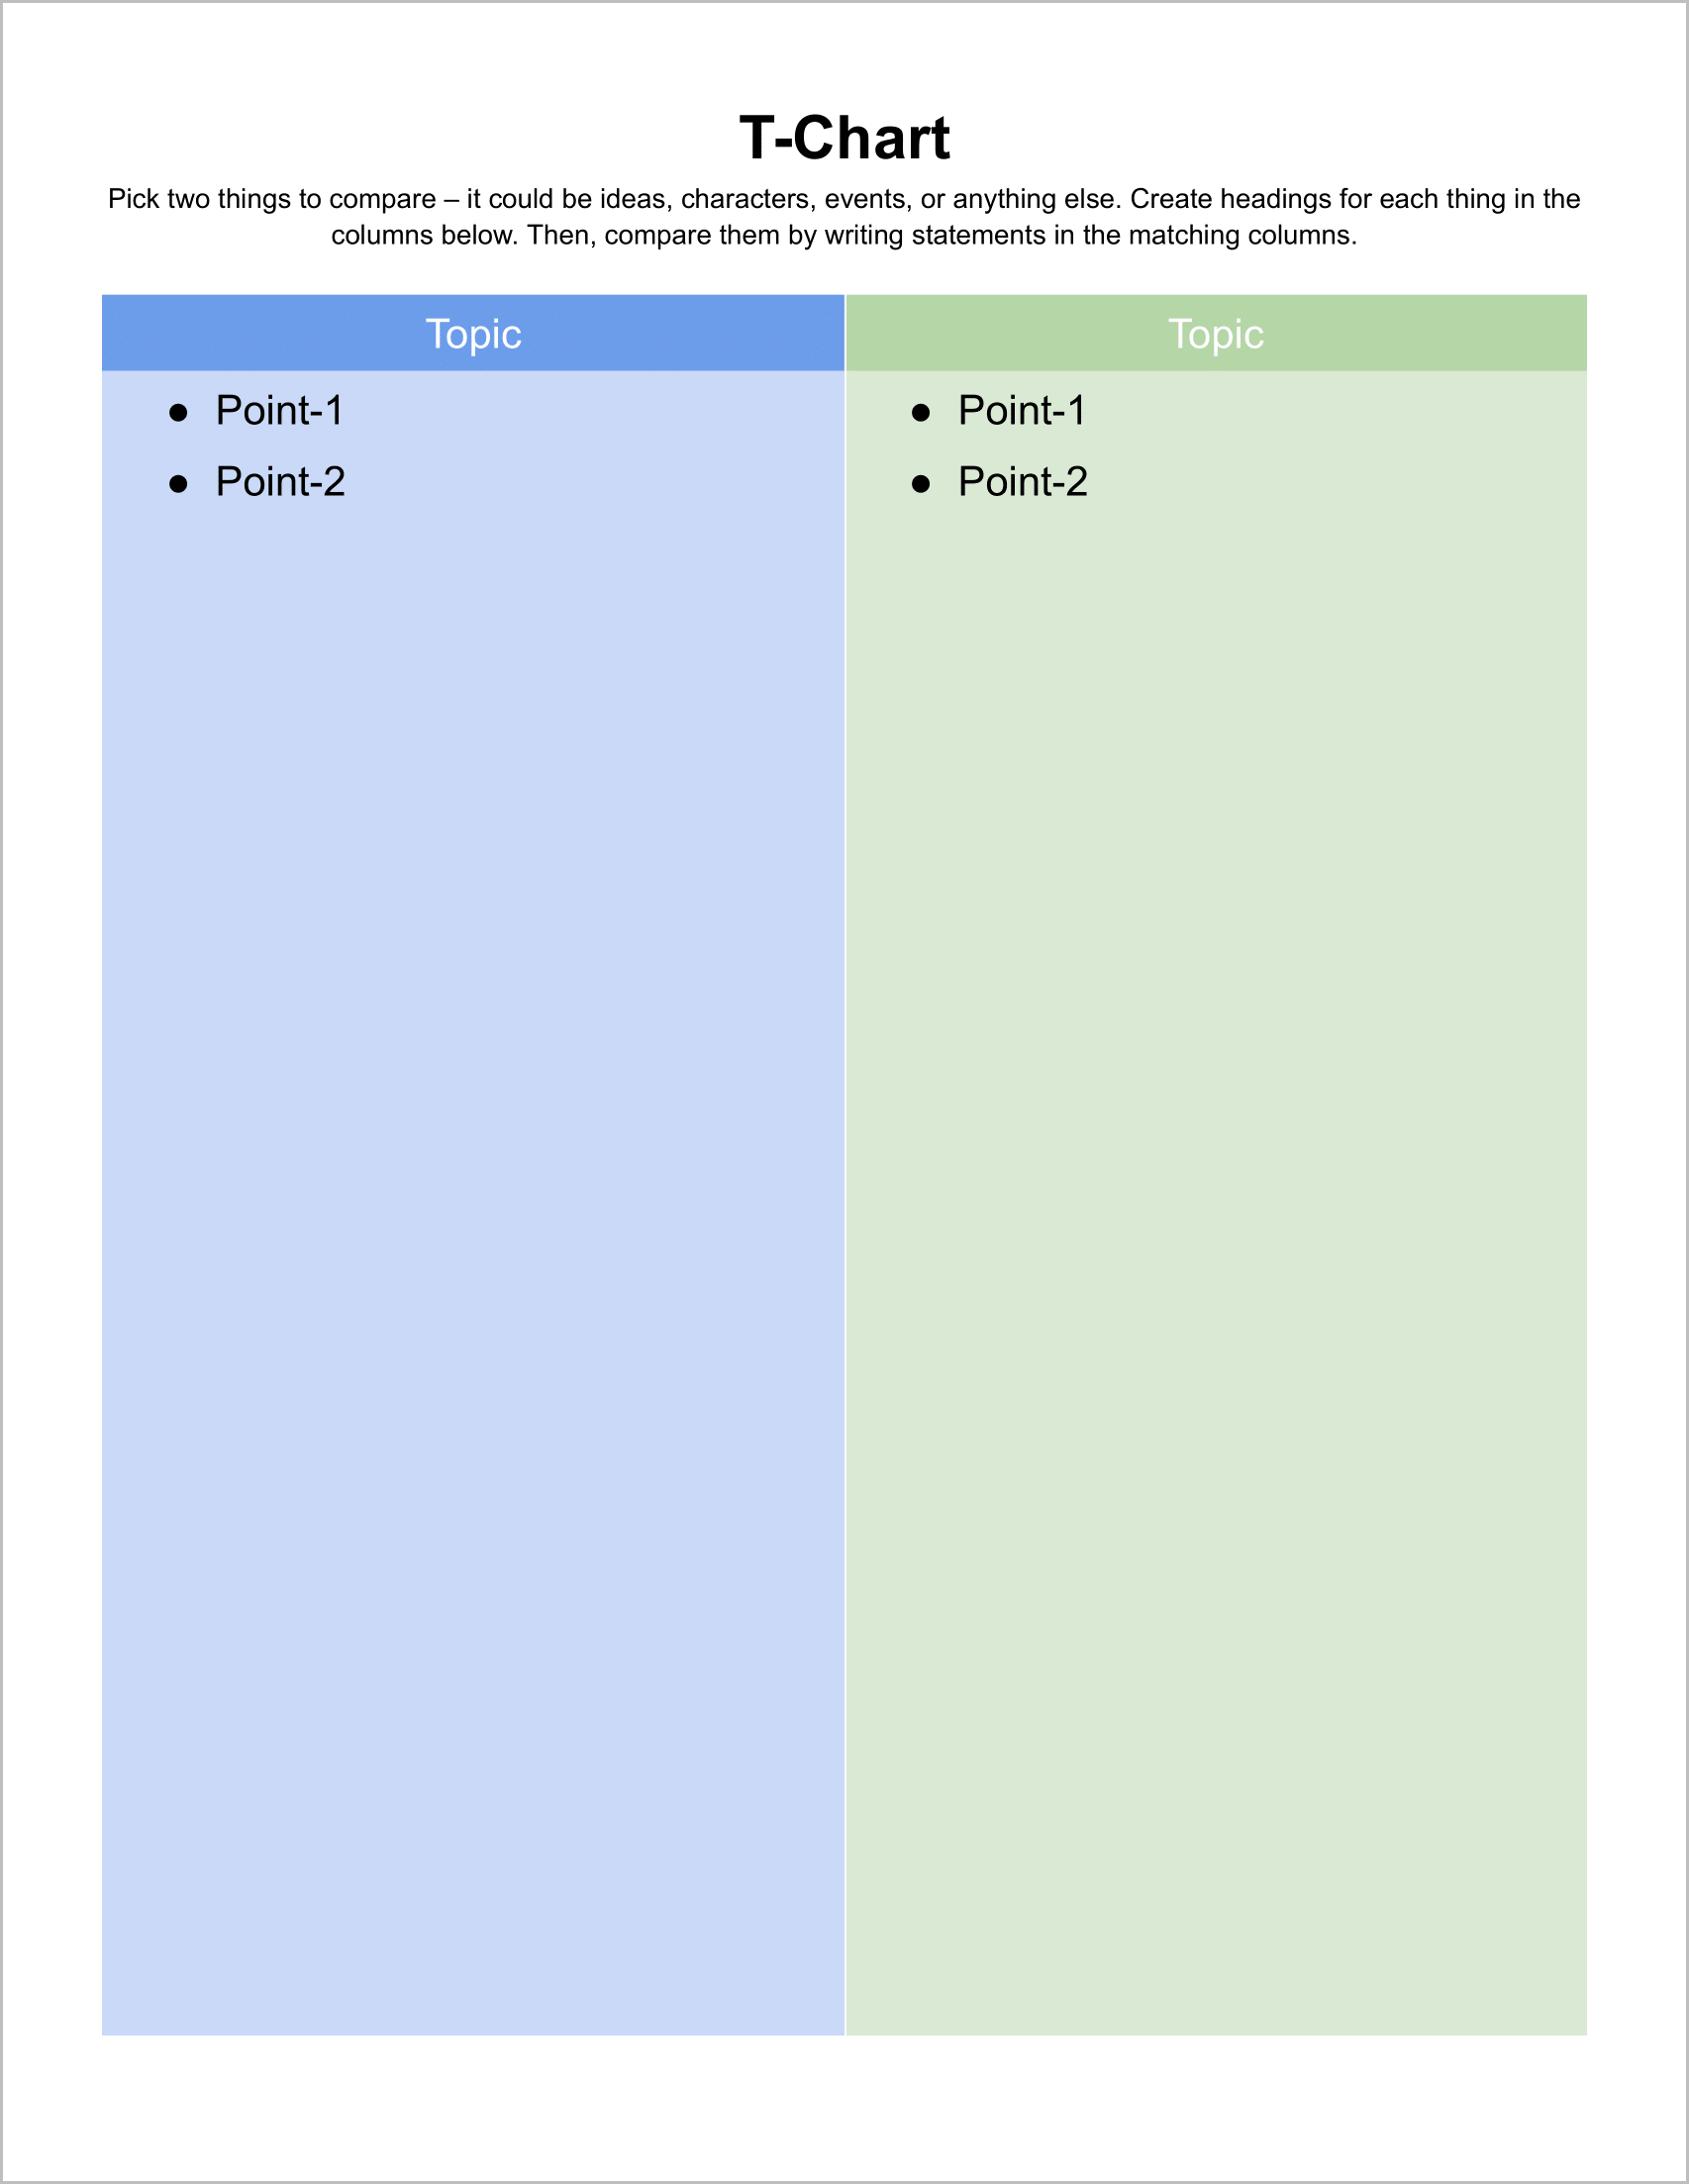 Free T-Chart Templates for Google Docs